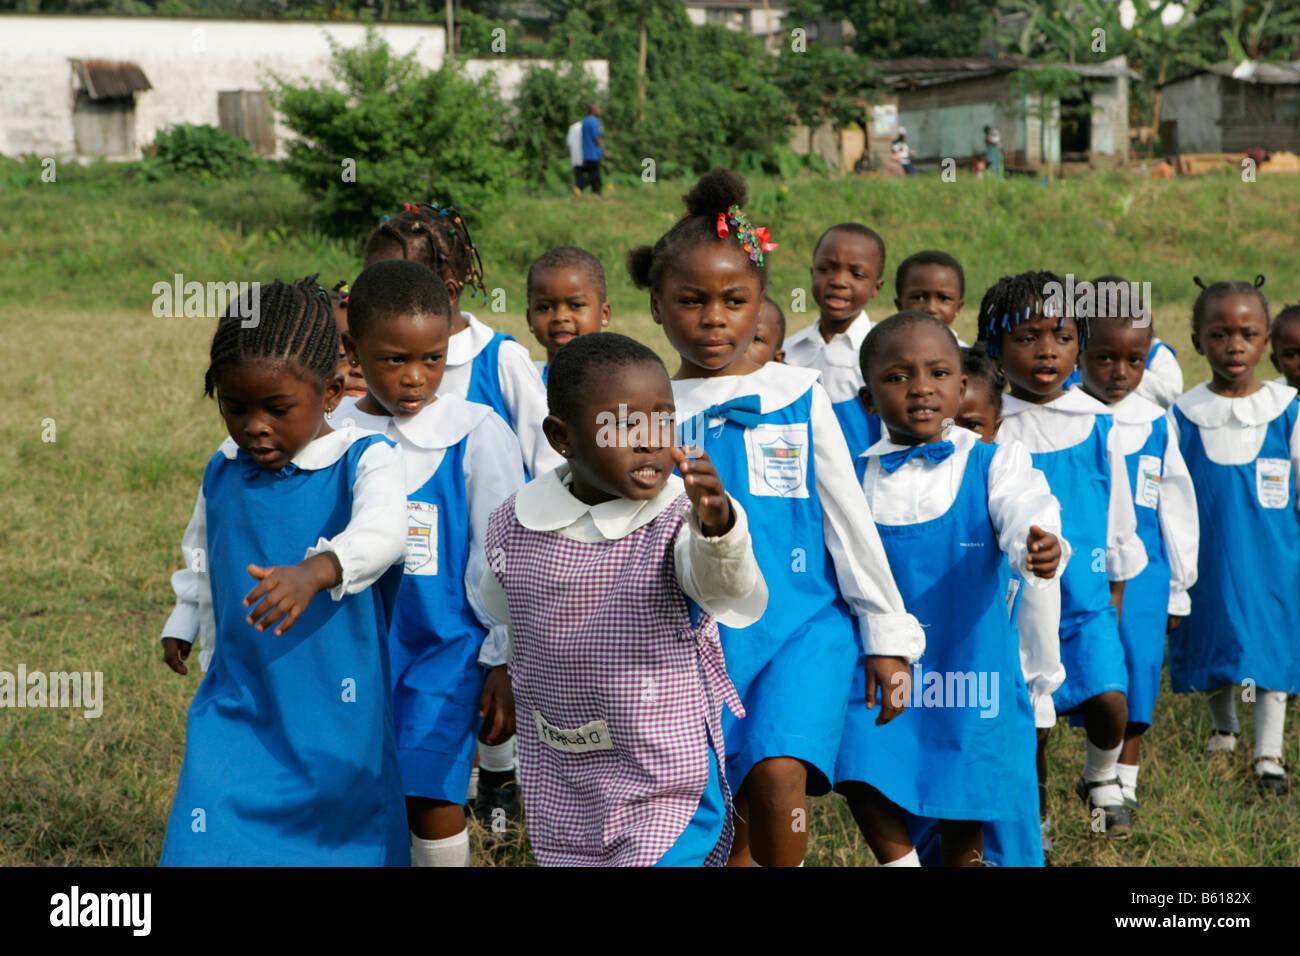 Pre-school children wearing uniforms during morning exercise, Buea, Cameroon, Africa Stock Photo